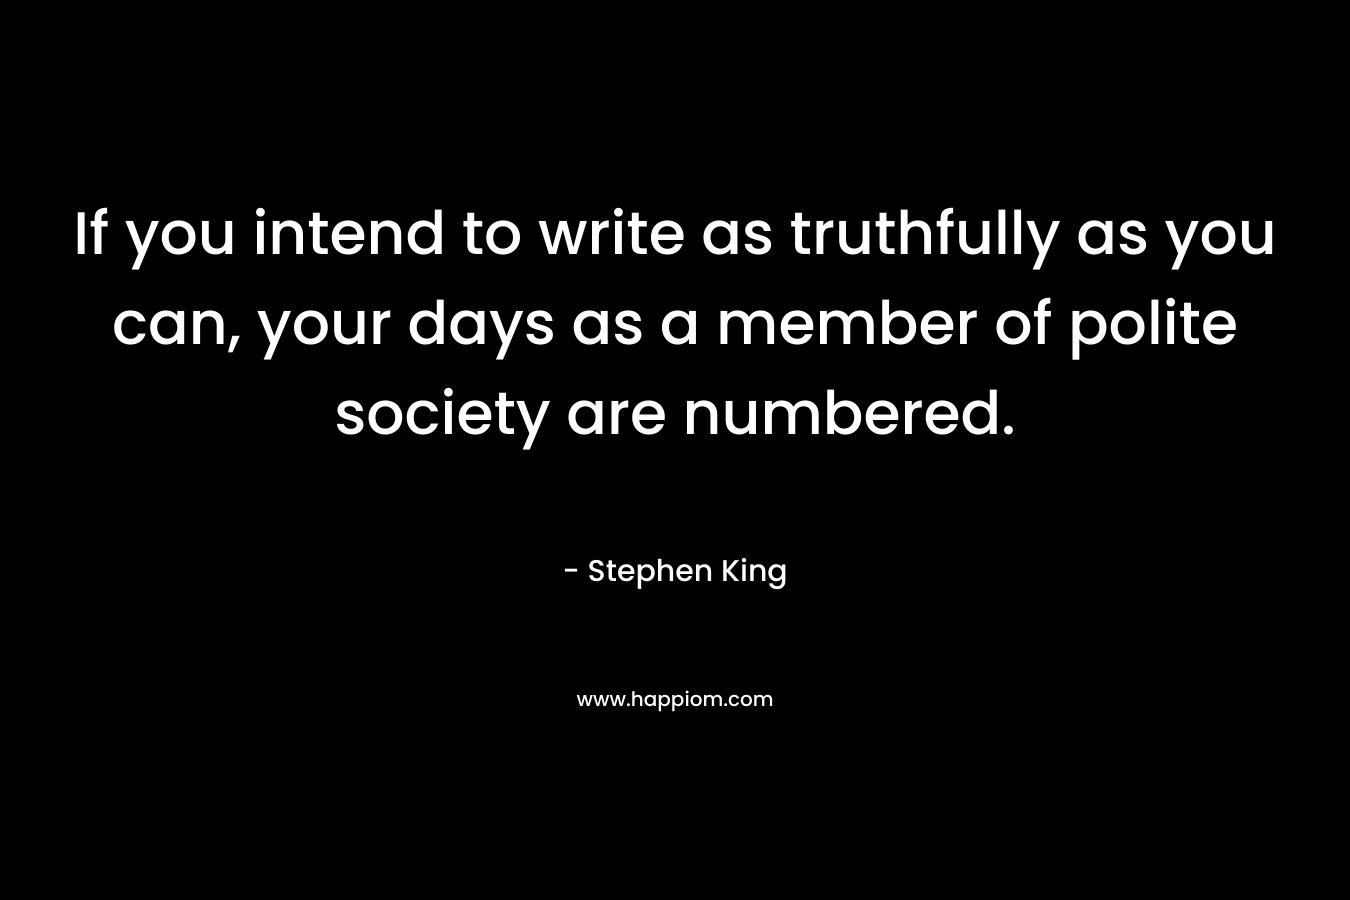 If you intend to write as truthfully as you can, your days as a member of polite society are numbered.